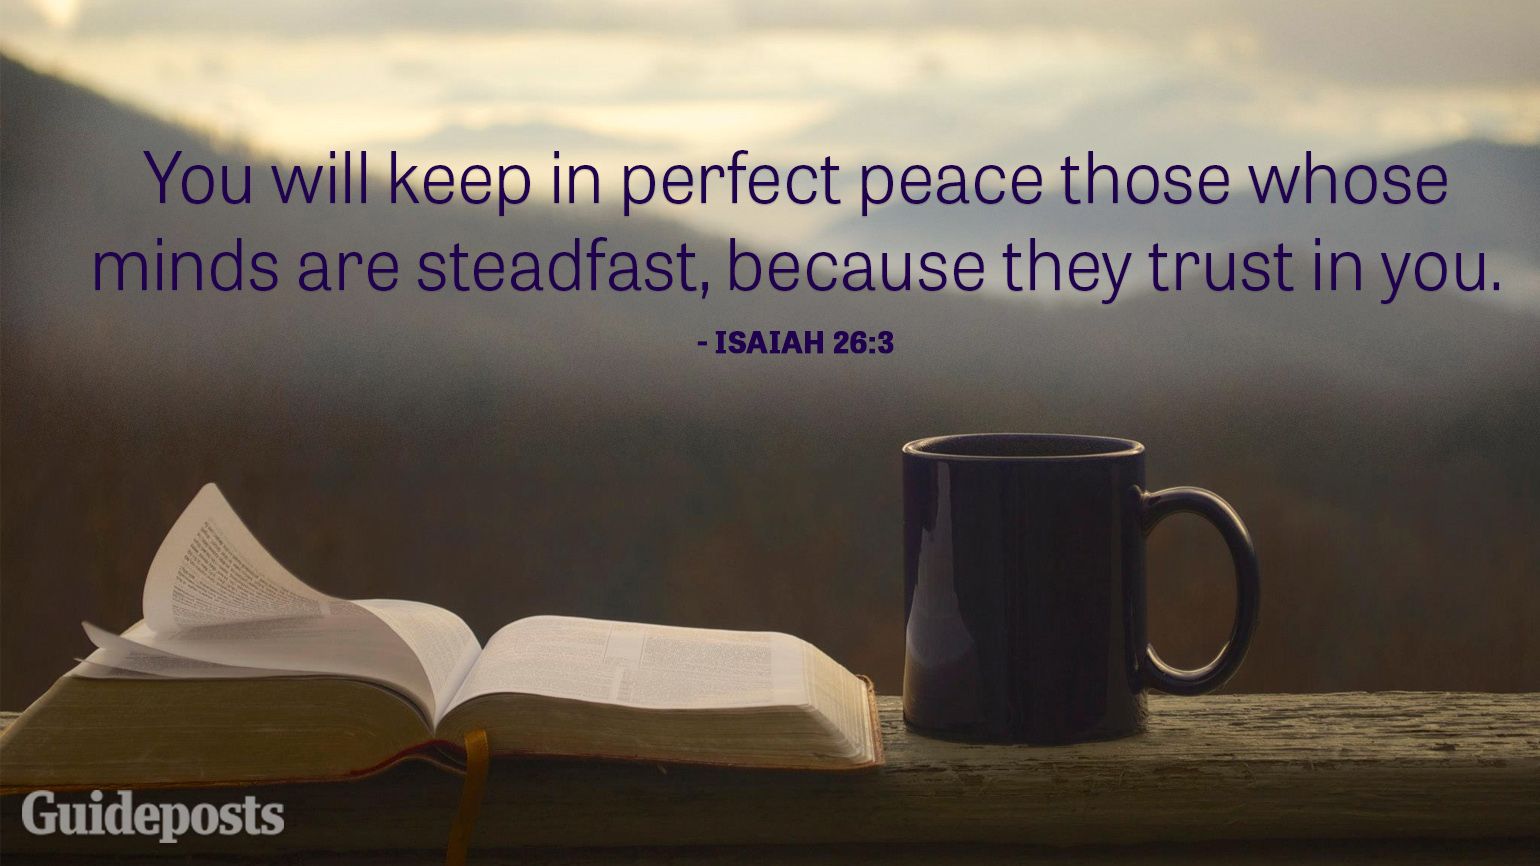 You will keep in perfect peace those whose minds are steadfast, because they trust in you.